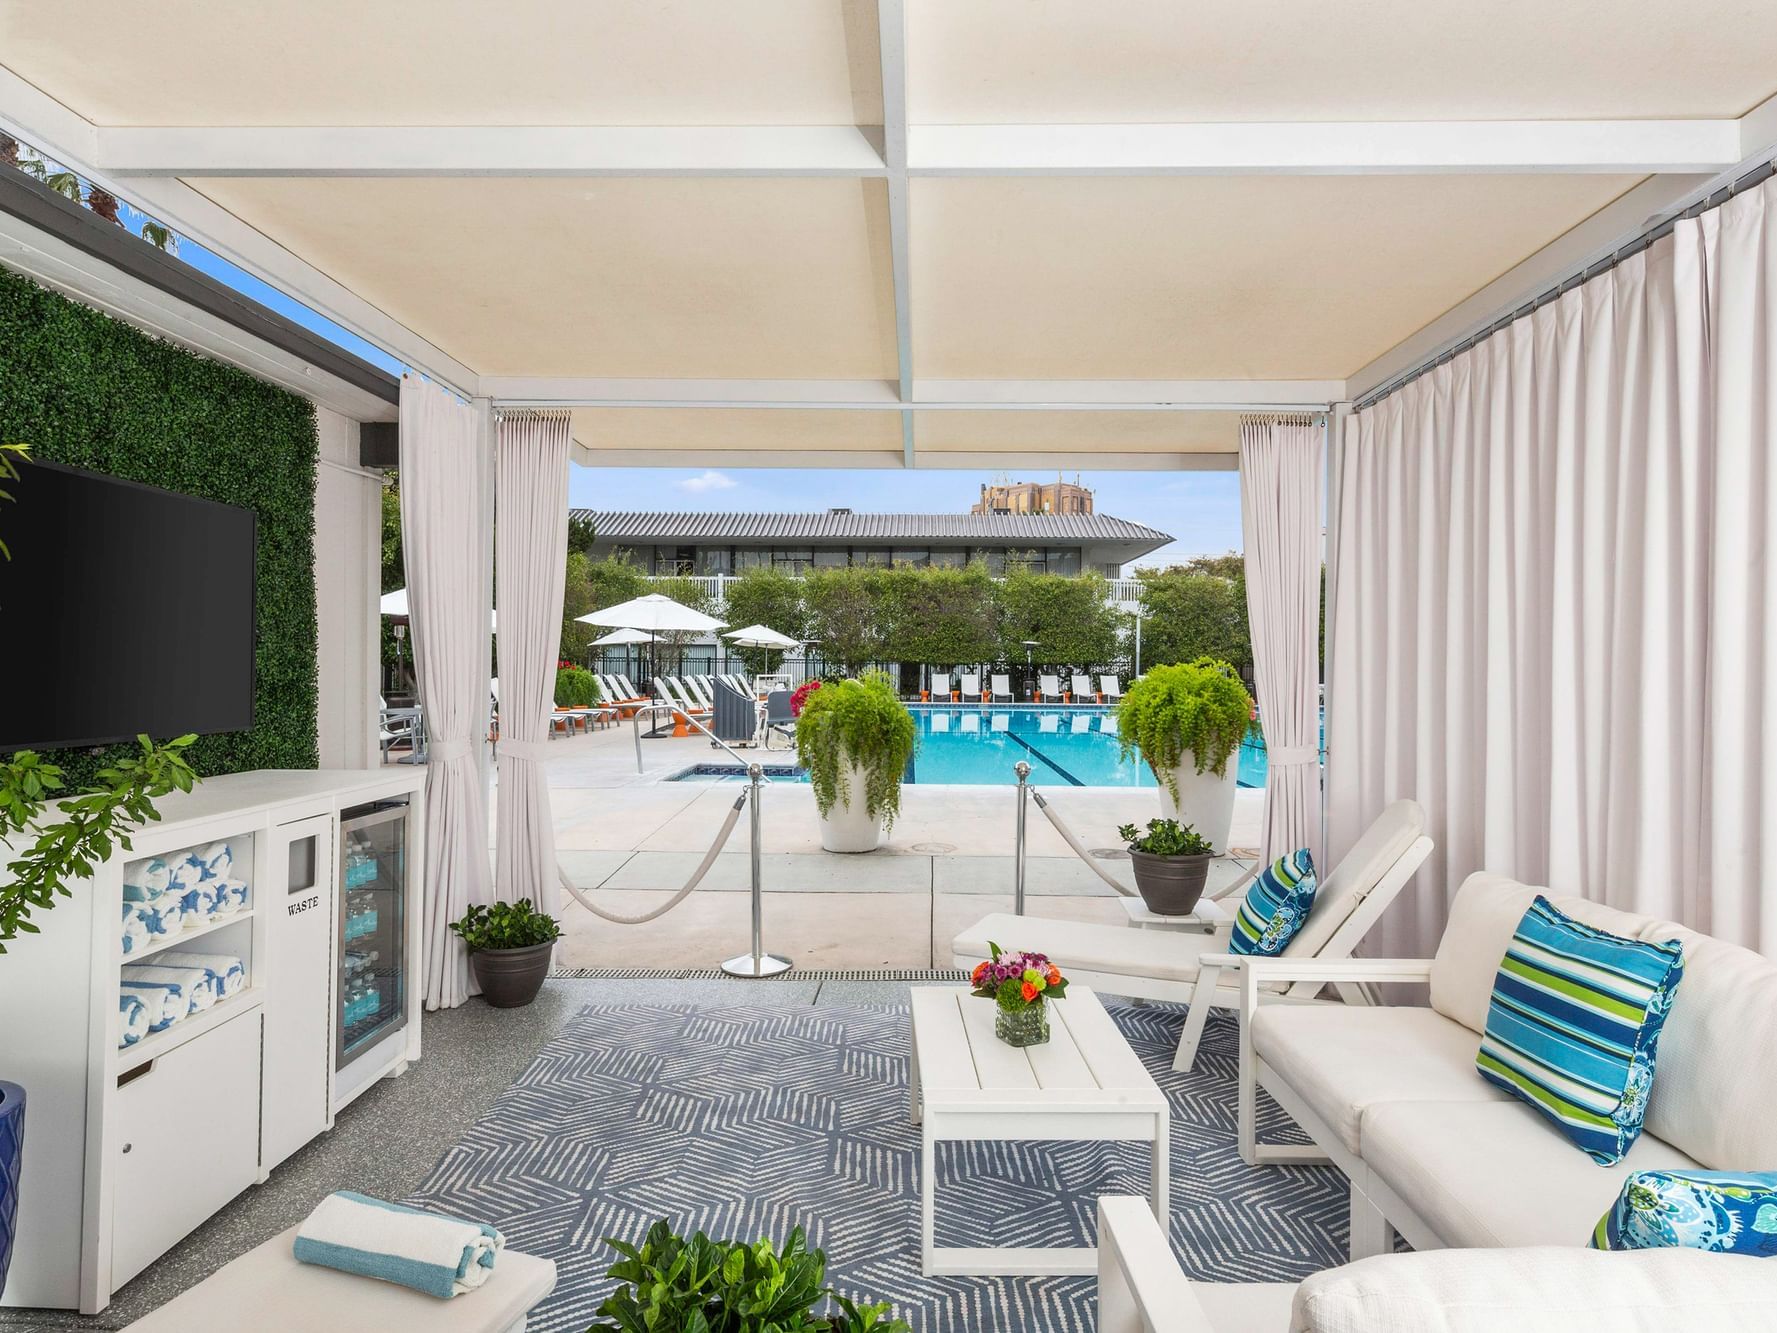 private cabana next to pool in background, cabana has white furniture, rug, small table, and wall-hung TV